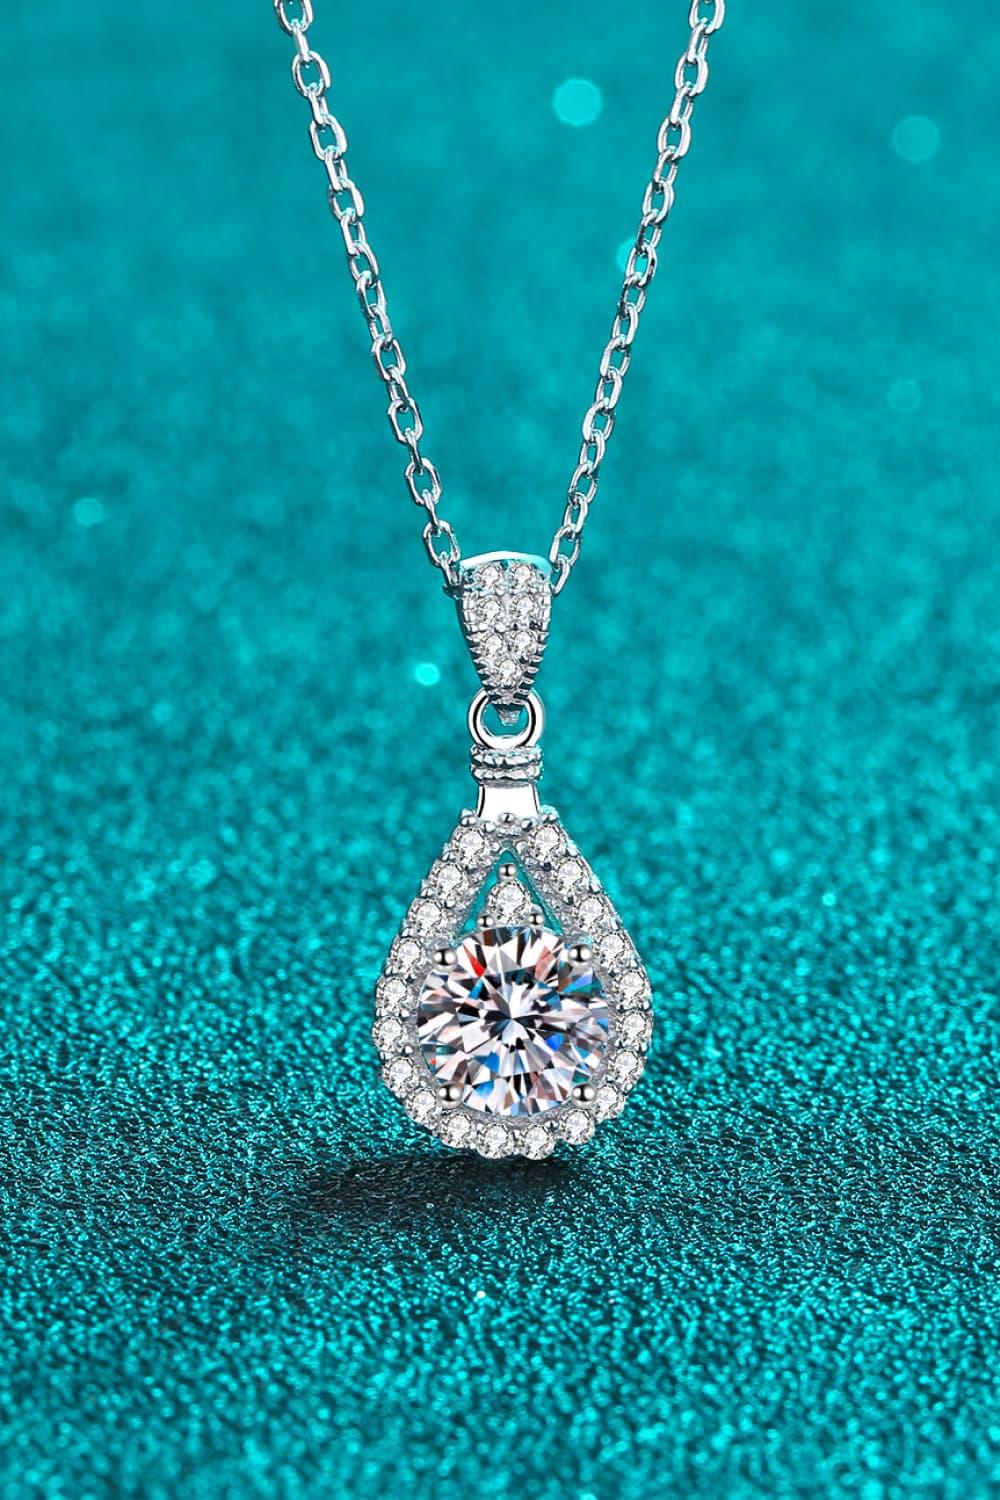 2 Carat Moissanite Teardrop Pendant 925 Sterling Silver Necklace - Lab Fashion, Home & Health